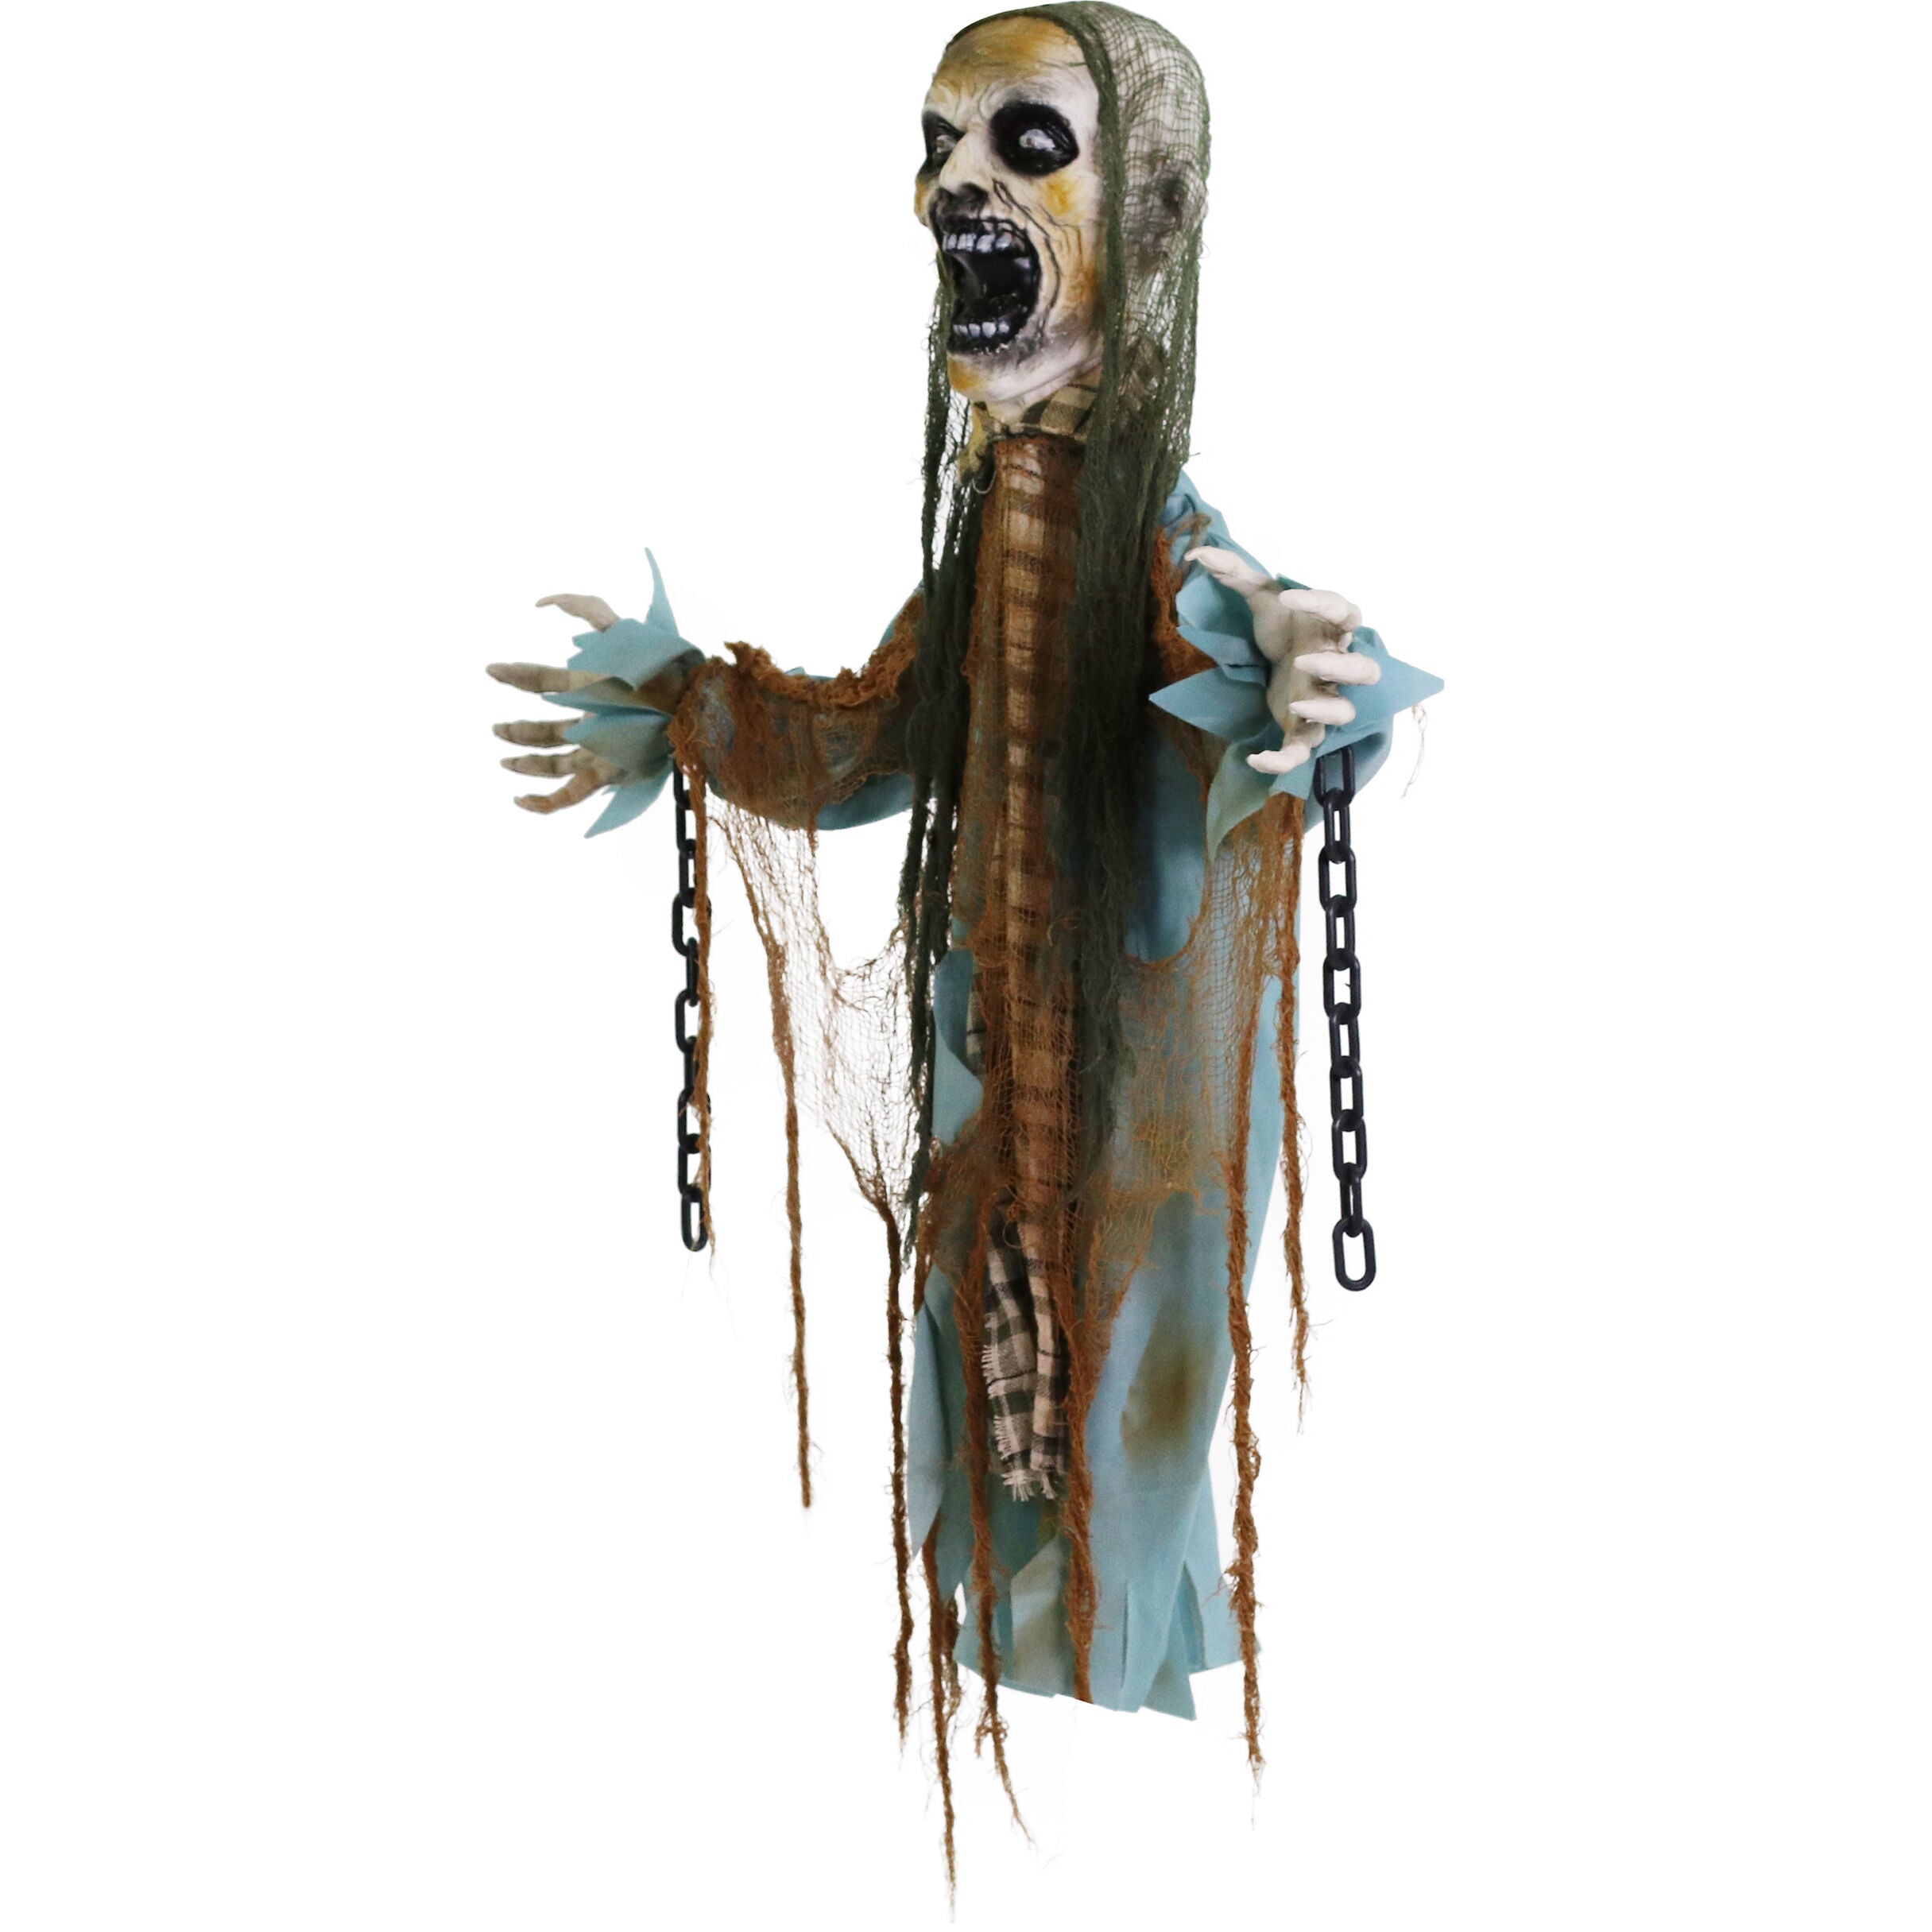 Haunted Hill Farm - Animatronic Twisting Zombie in Chains with Backdrop and Folding Door Hook for Scary Halloween Decoration